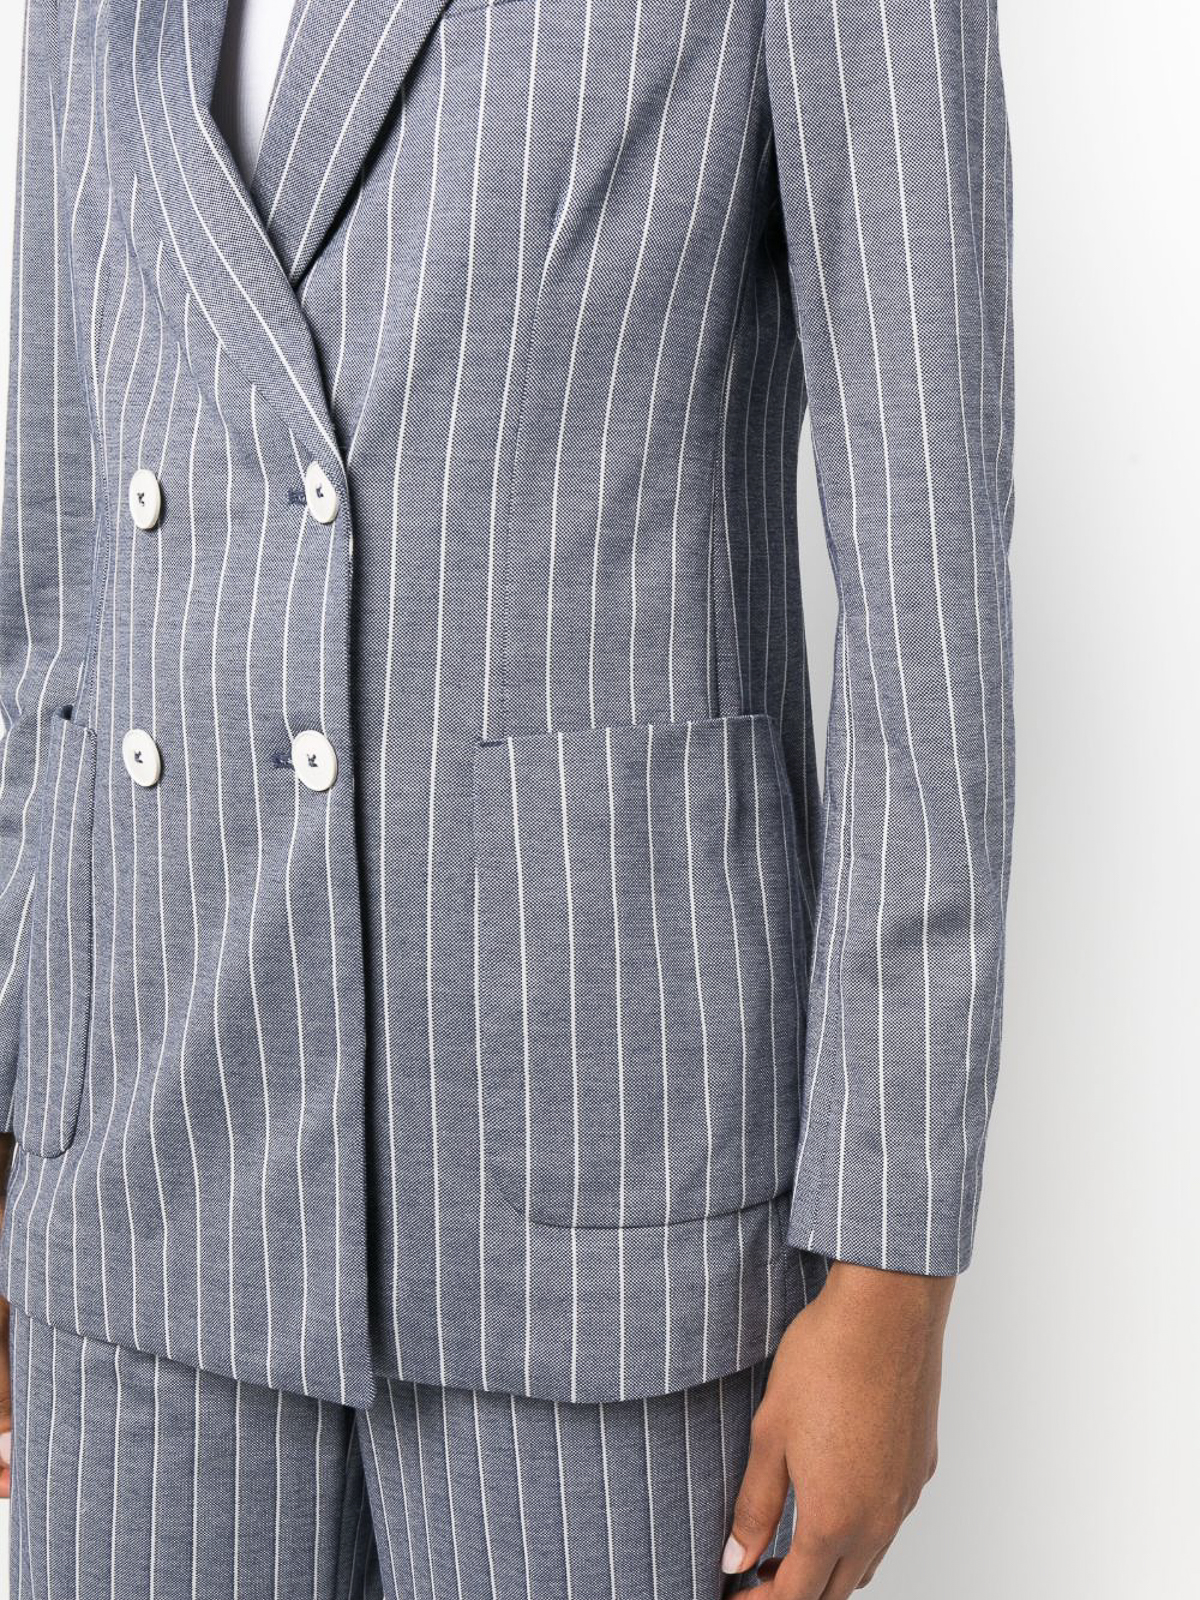 Casual jackets Circolo 1901 - Striped double-breasted jacket - FD2766001T